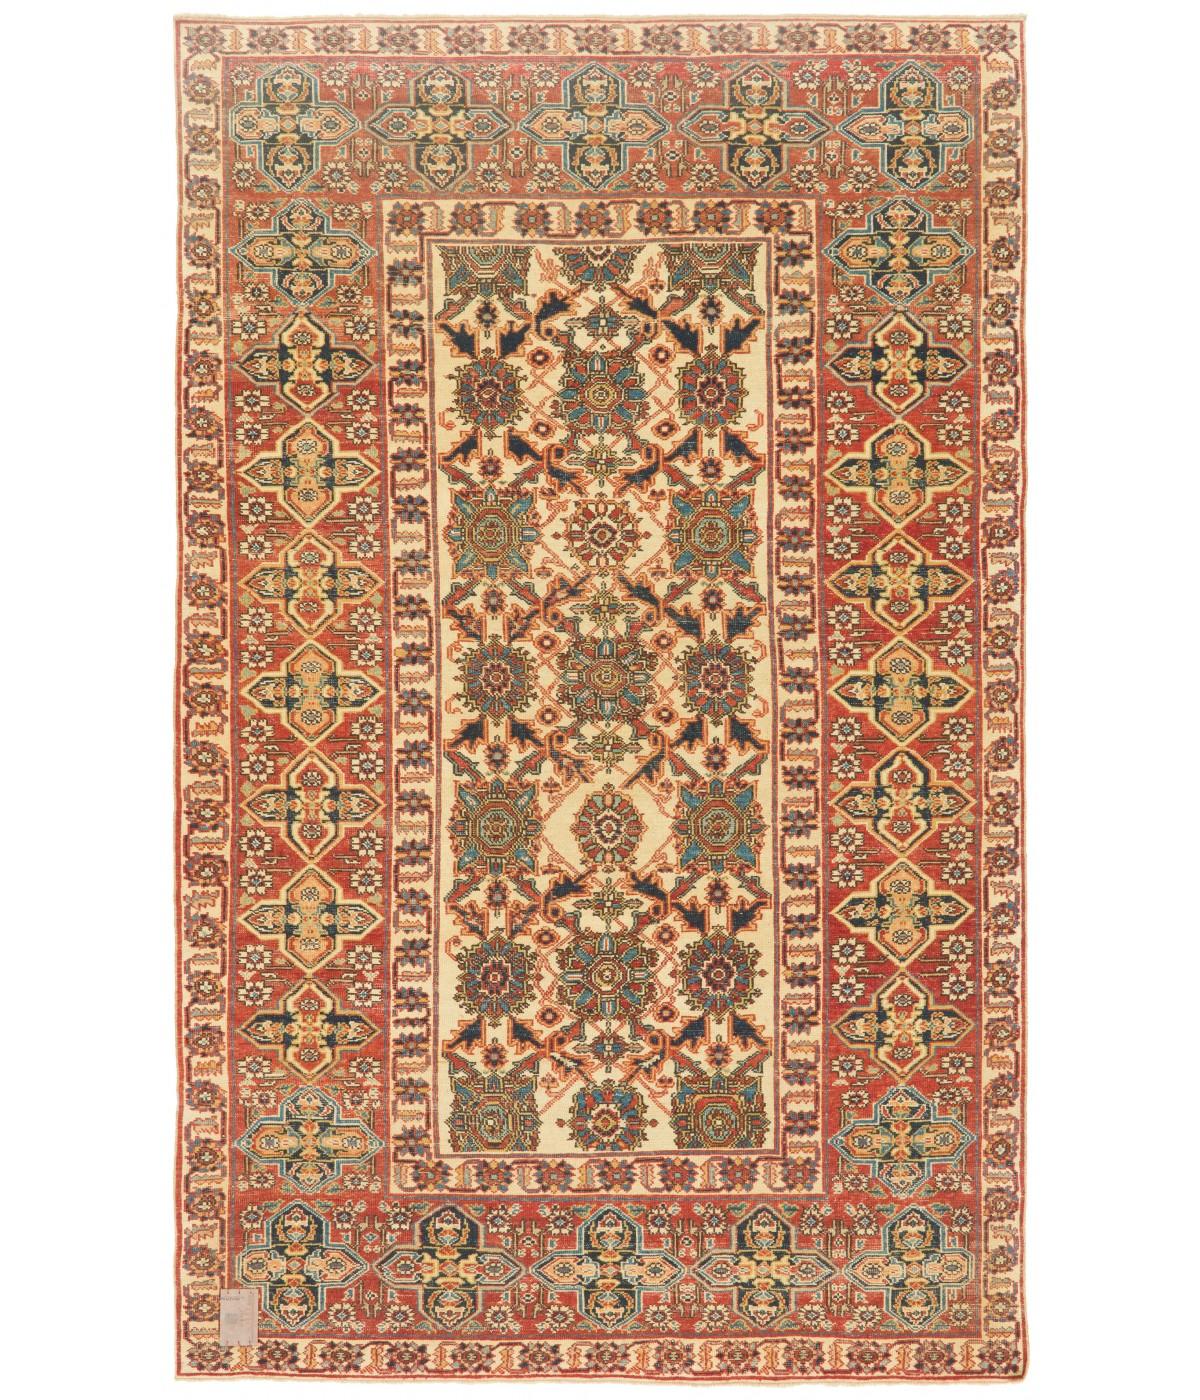 The design source of the rug comes from the book Caucasian Carpets, E. Gans-Reudin, Thames and Hudson, Switzerland 1986, pg.284. This is a spectacular example of the Orducth-Konagkend type rug in the late 19th century in the Kuba region, Caucasus.